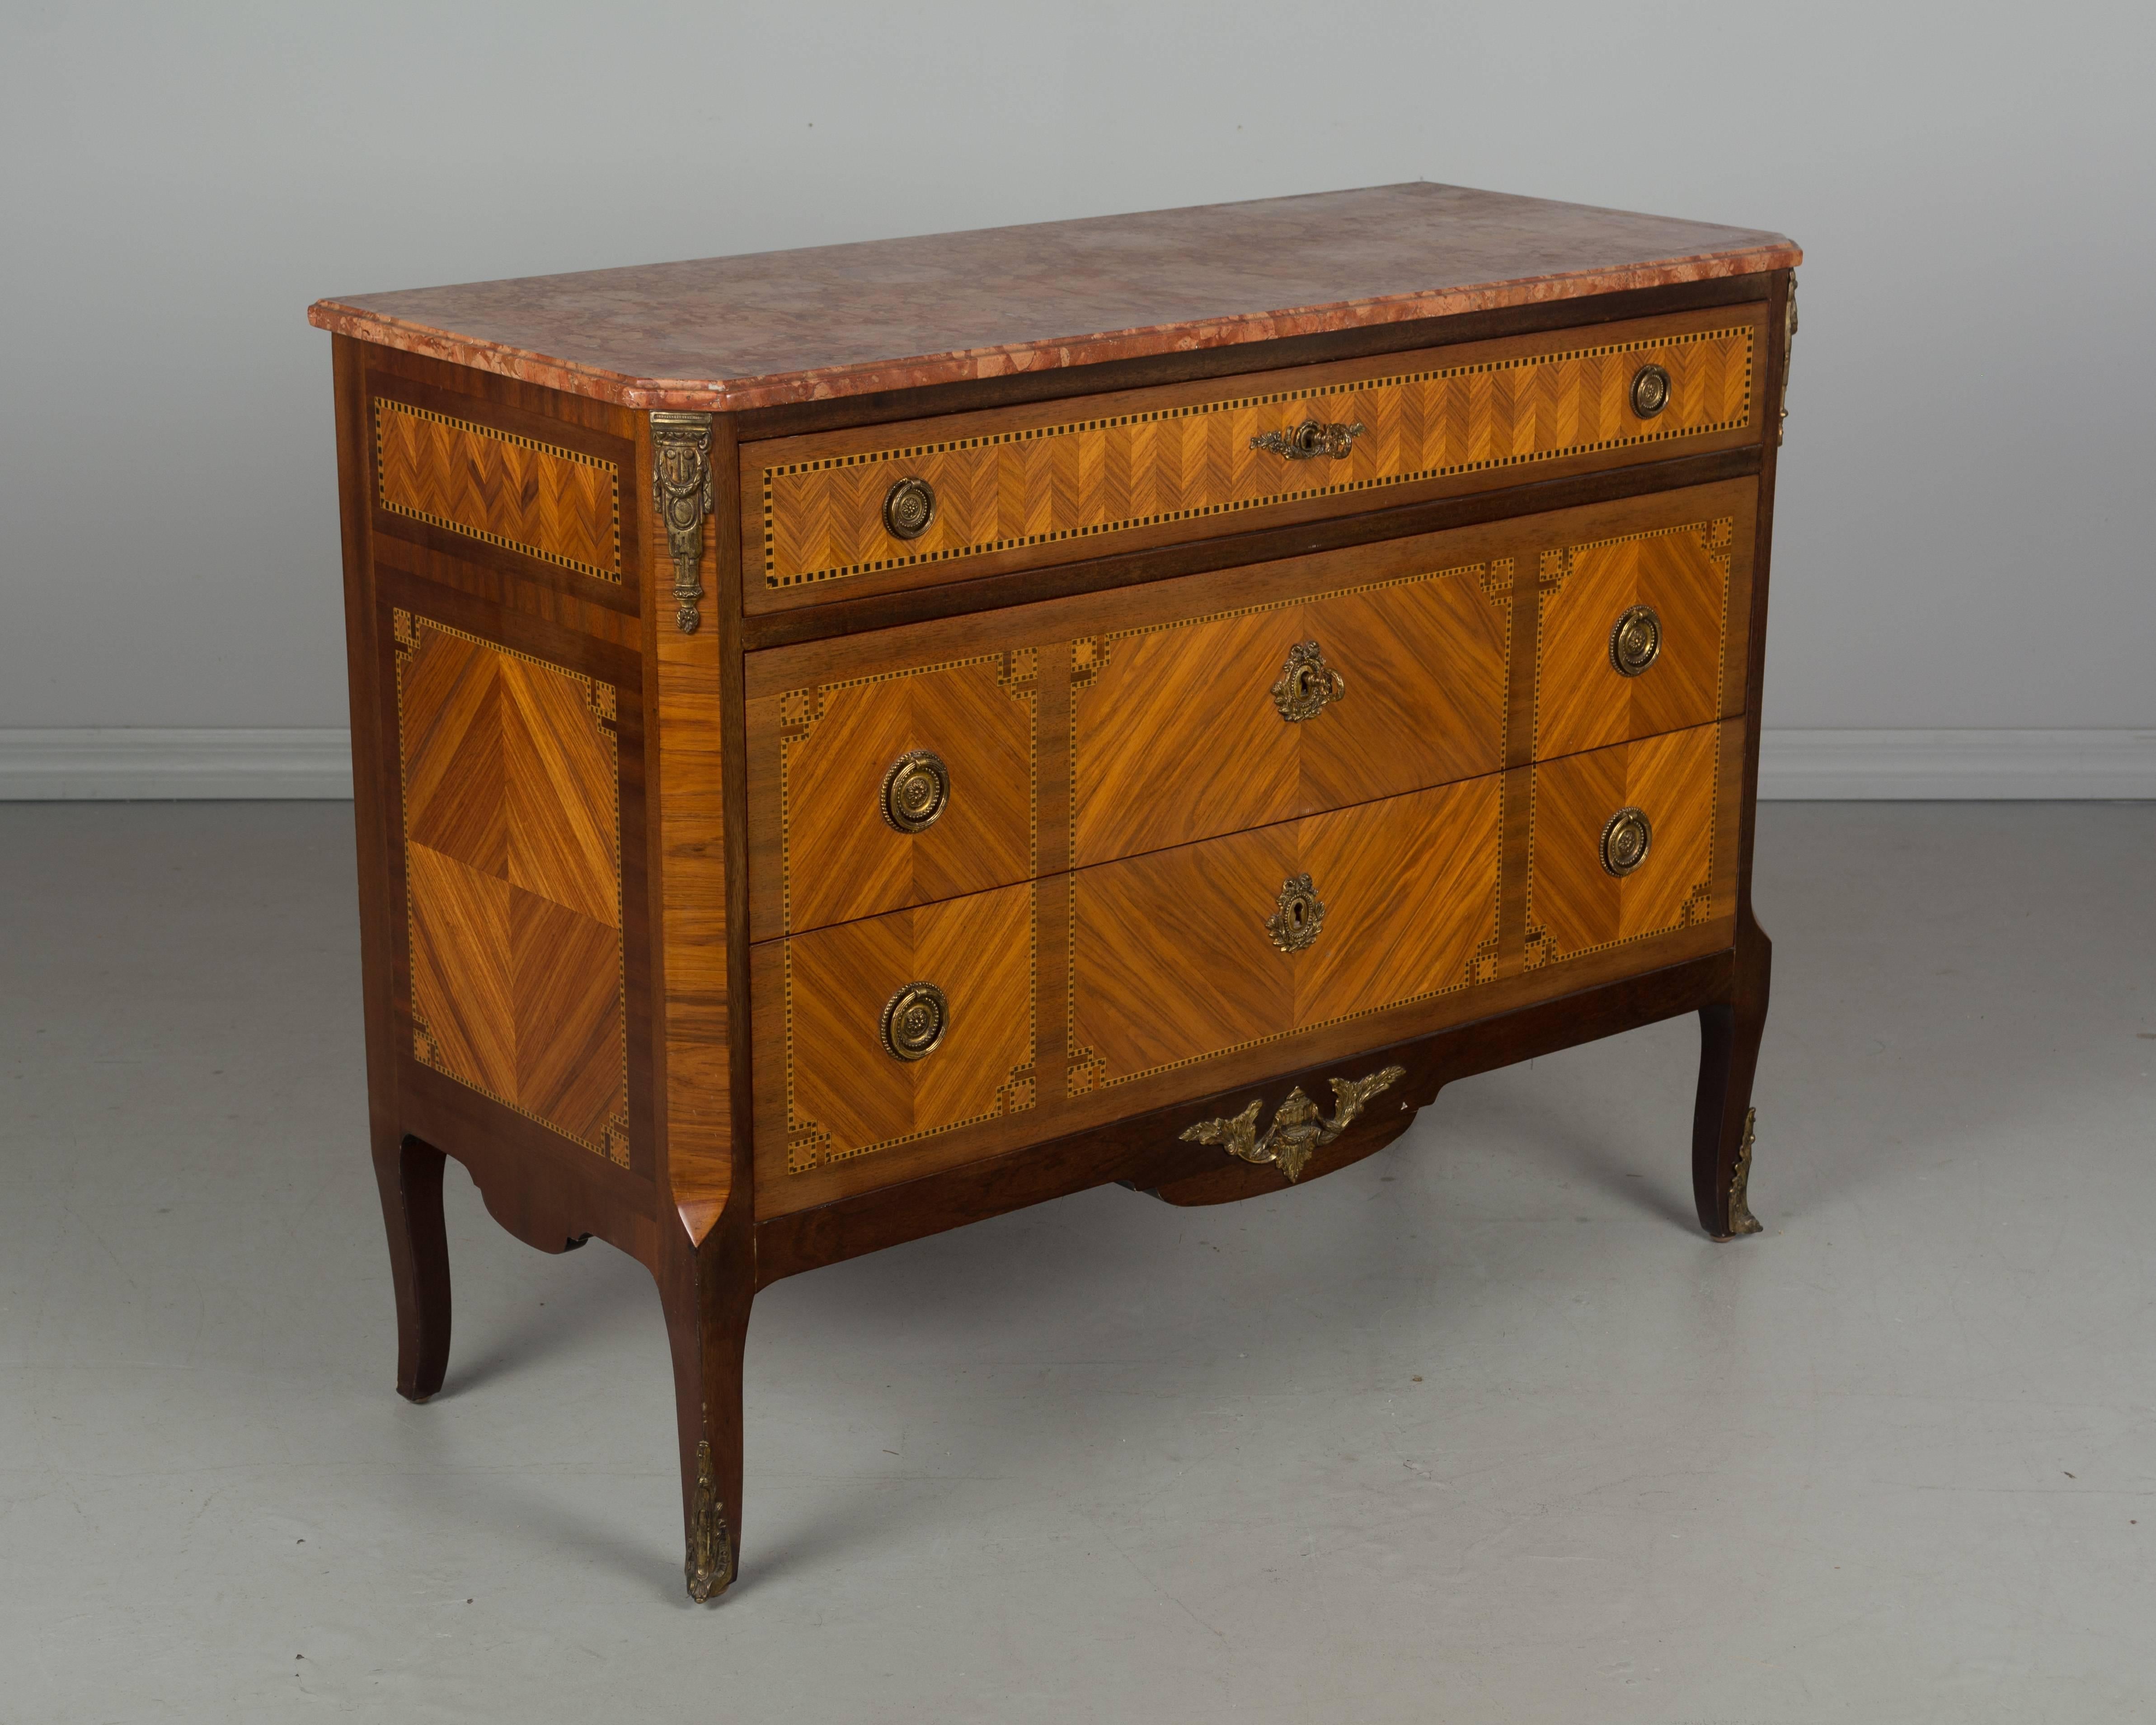 20th Century Pair of Louis XVI Style Marquetry Commodes or Chest of Drawers